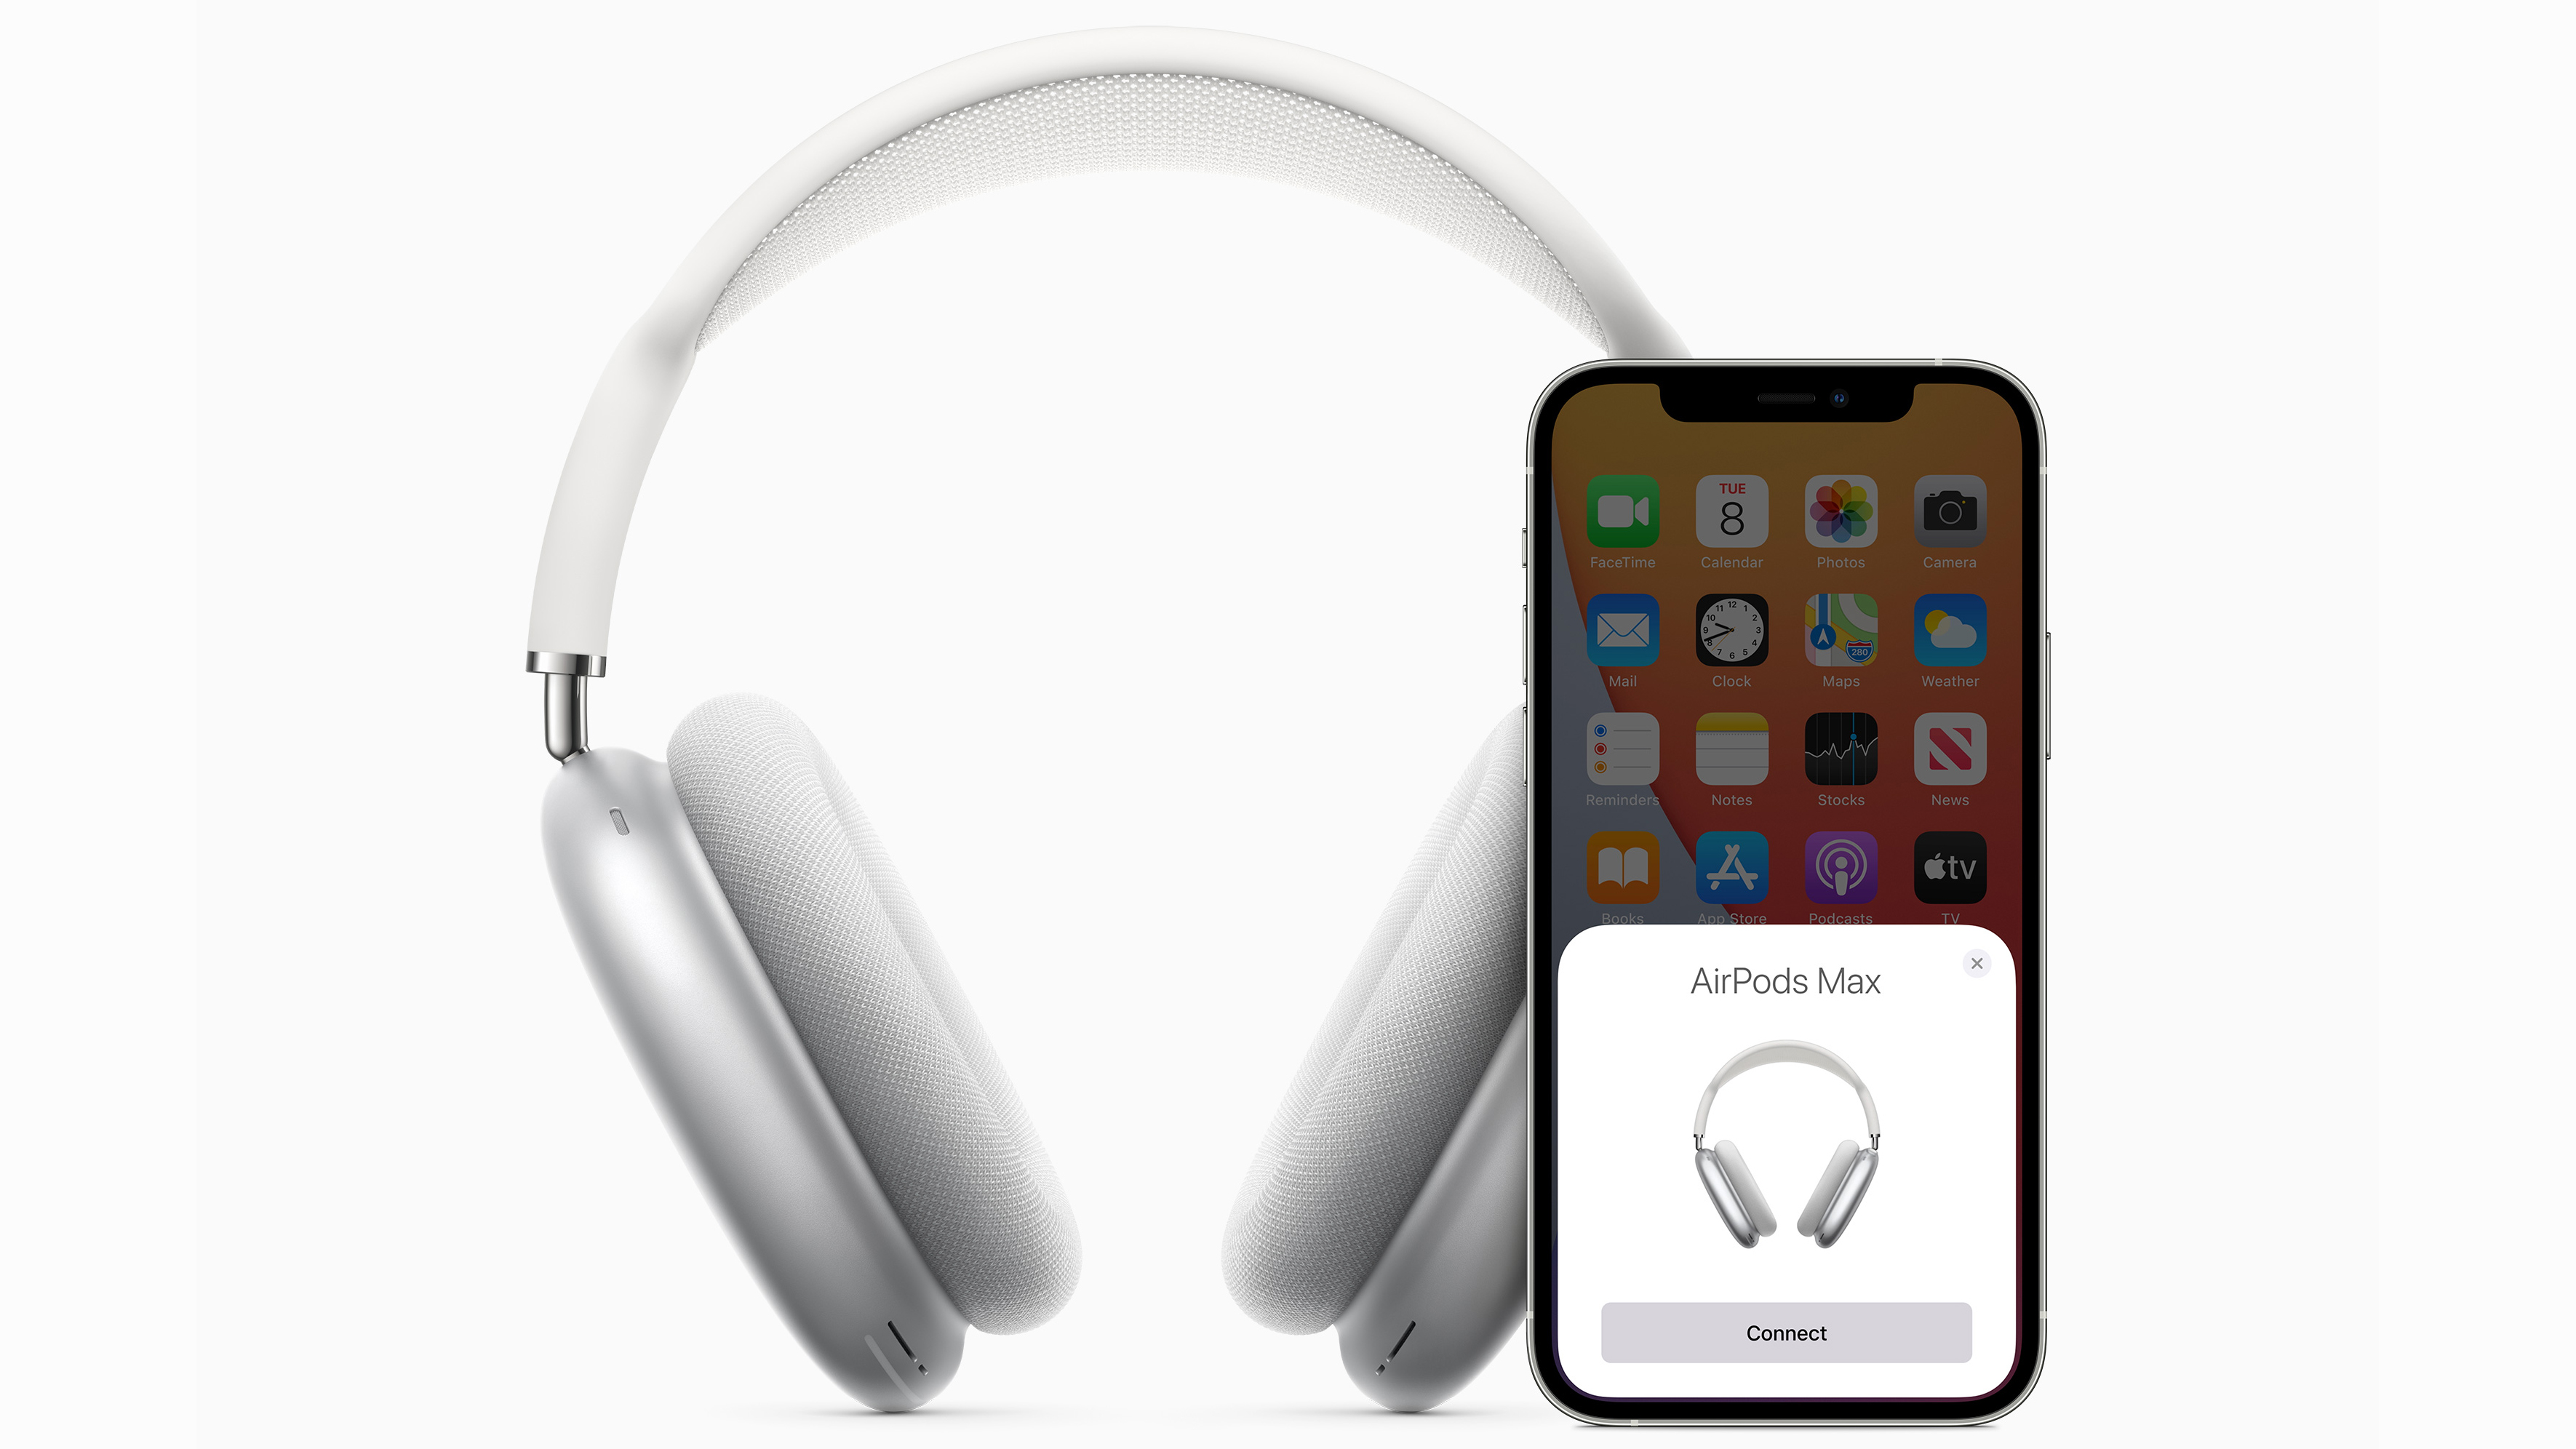 Concept: Meet iPod Max with Apple Music Lossless and AirPods Max